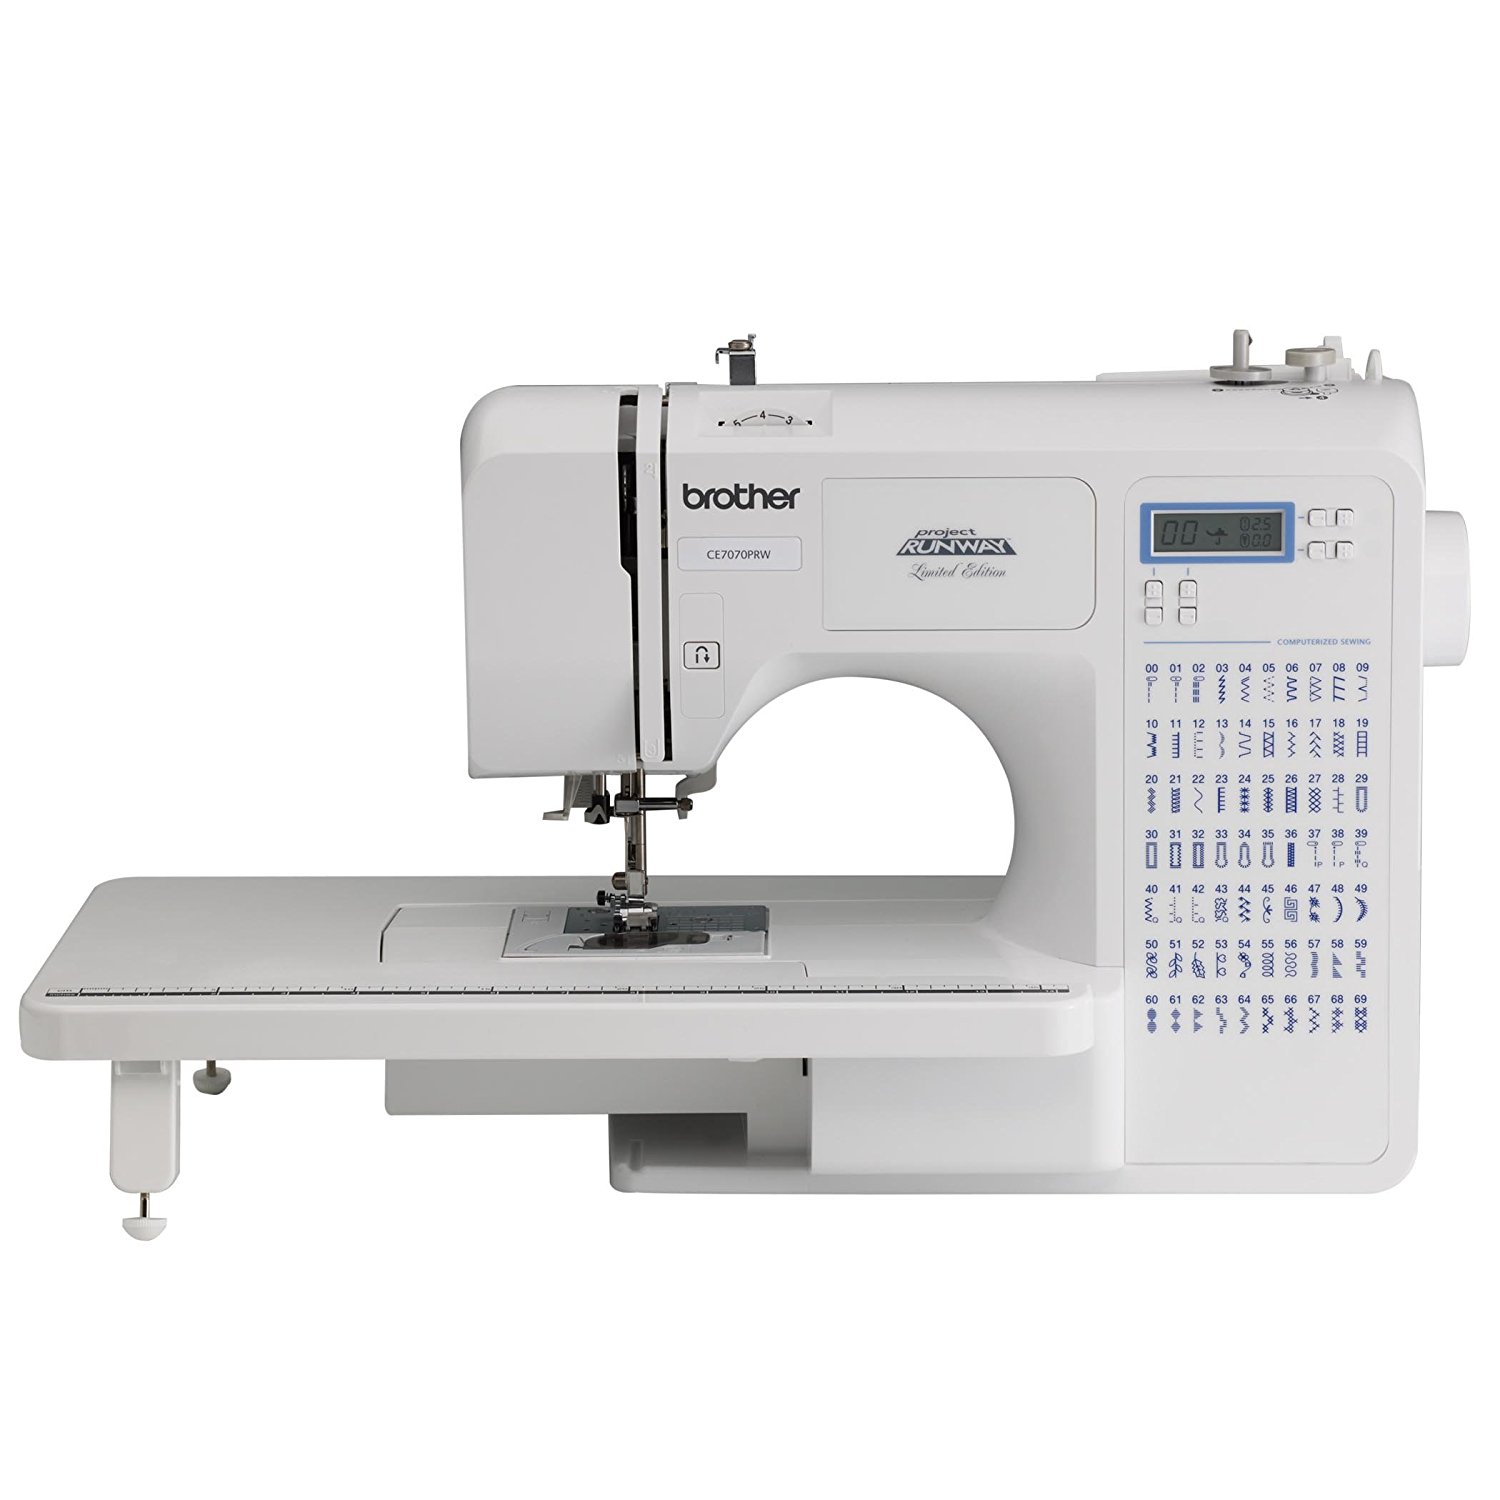 Best Sewing Machines For Home Use 2020